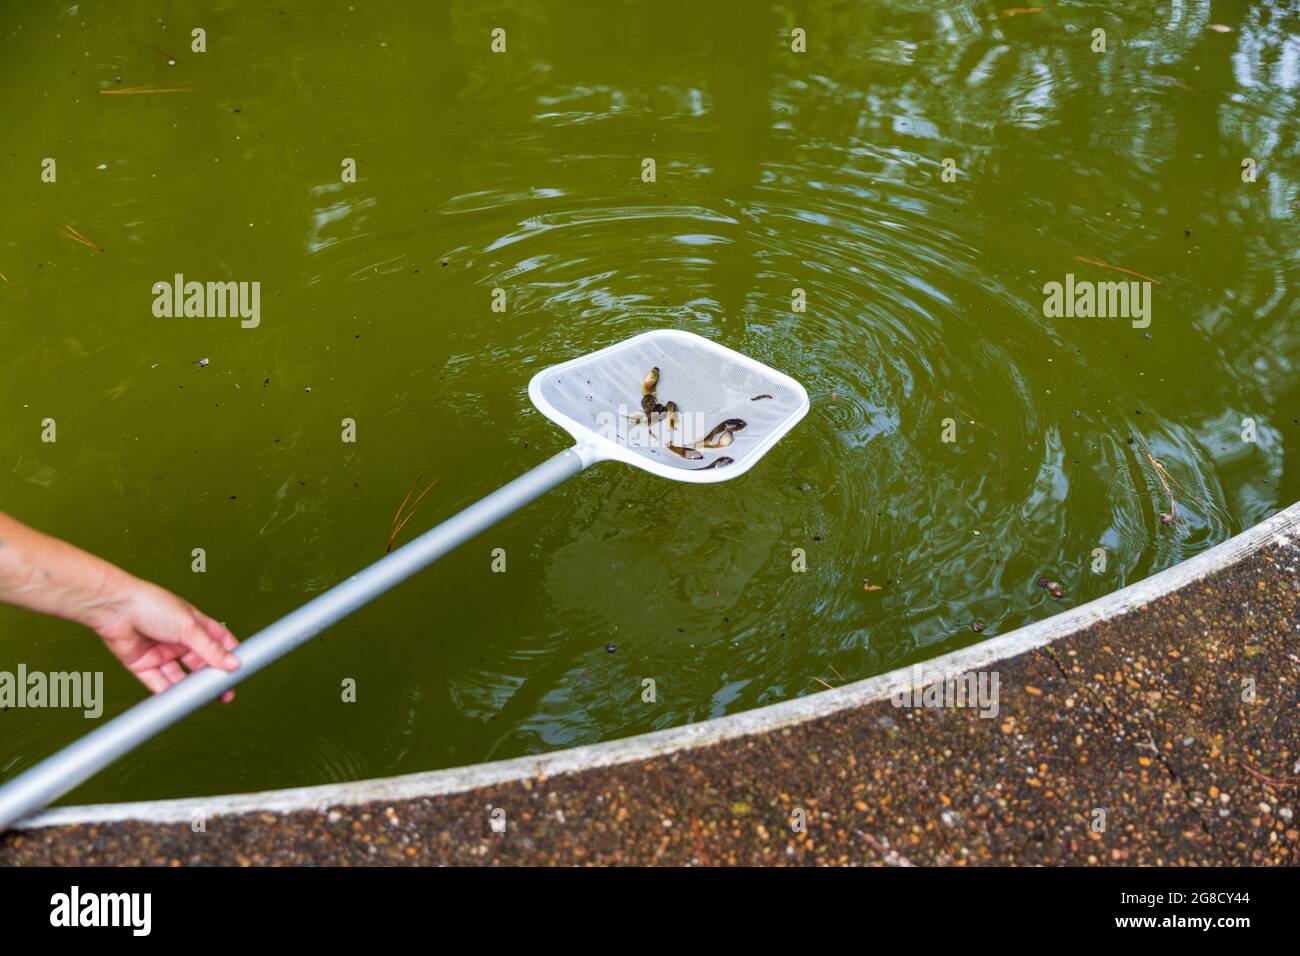 Scooping tadpoles from filthy swimming pool in disrepair Stock Photo